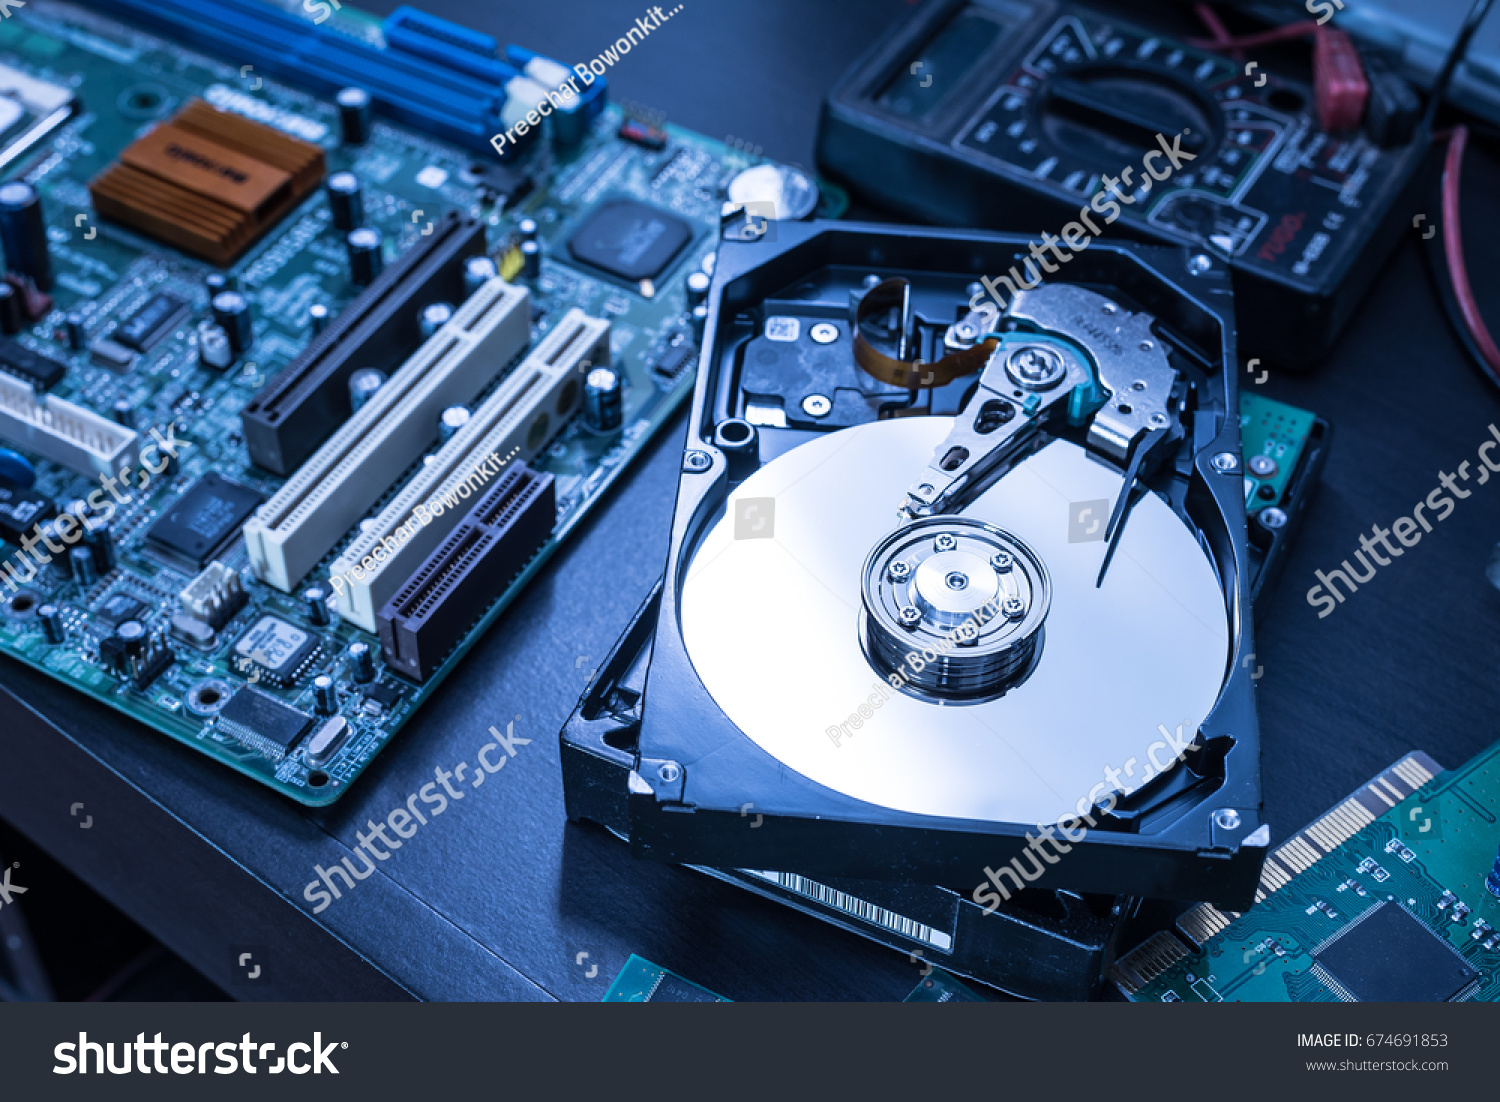 Abstract Image Inside Hard Disk Drive Stock Photo Edit Now 674691853